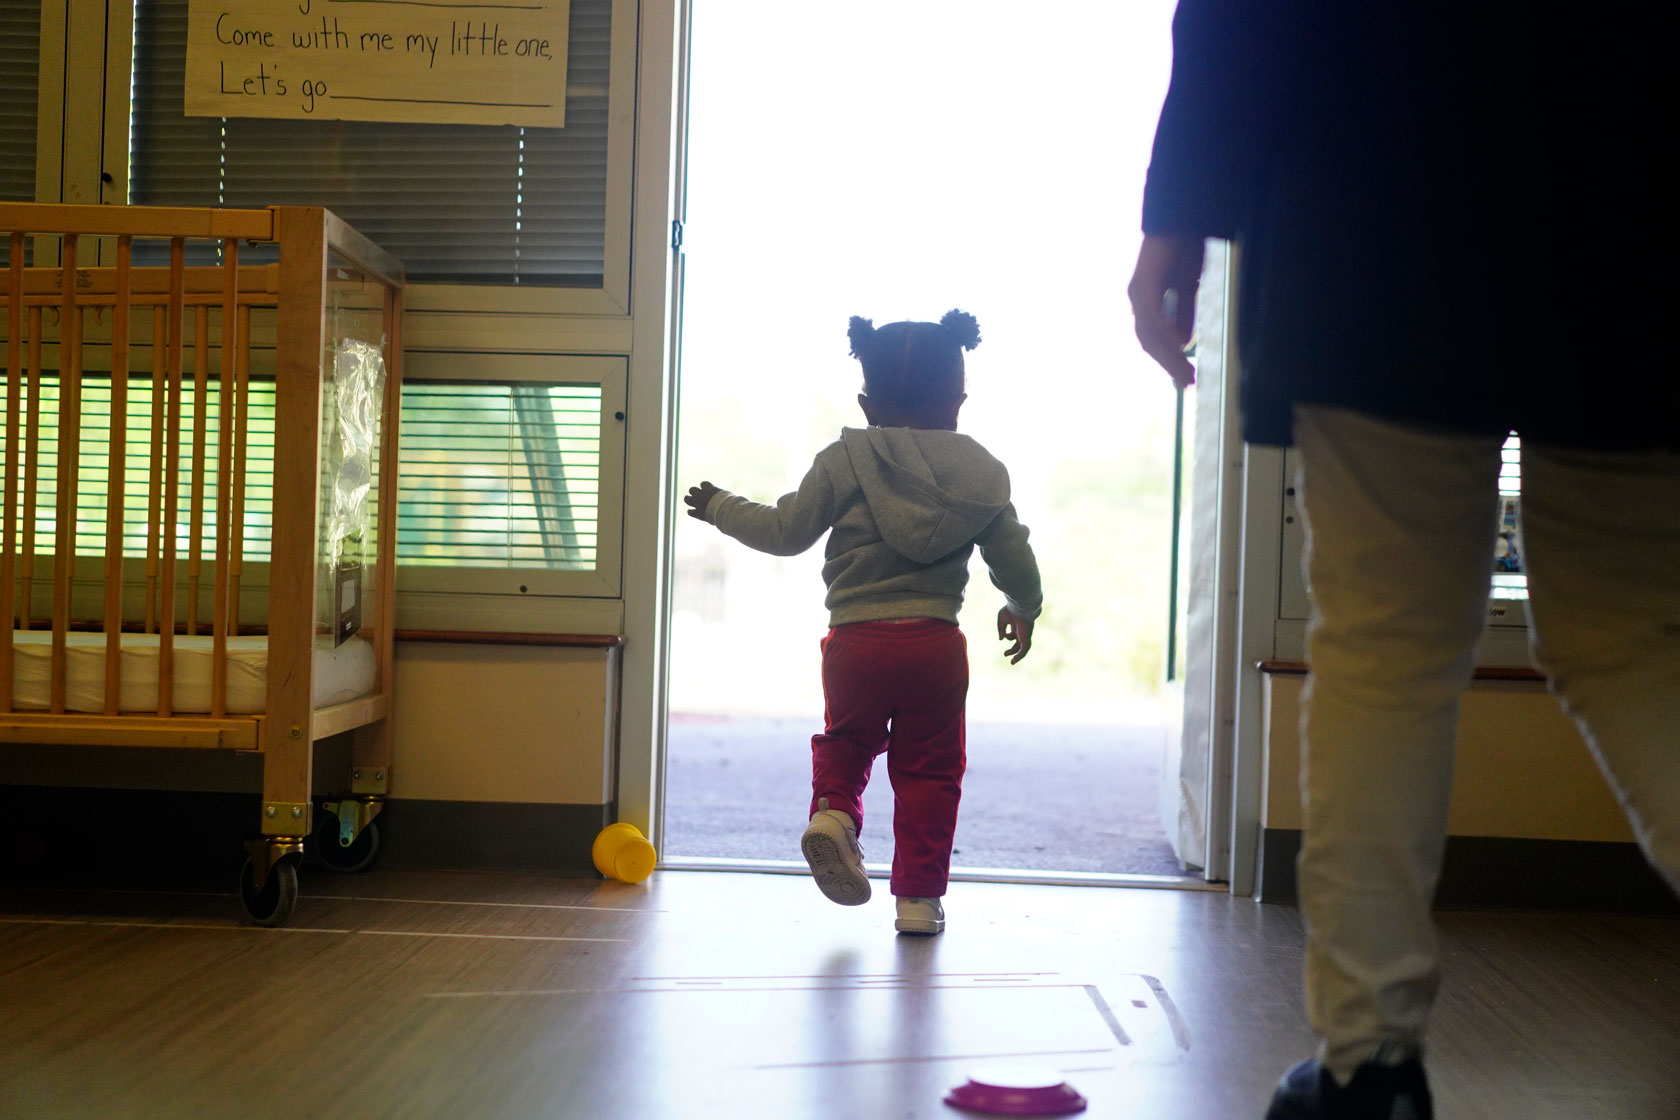 Image showing a child walking in a well-lit room.